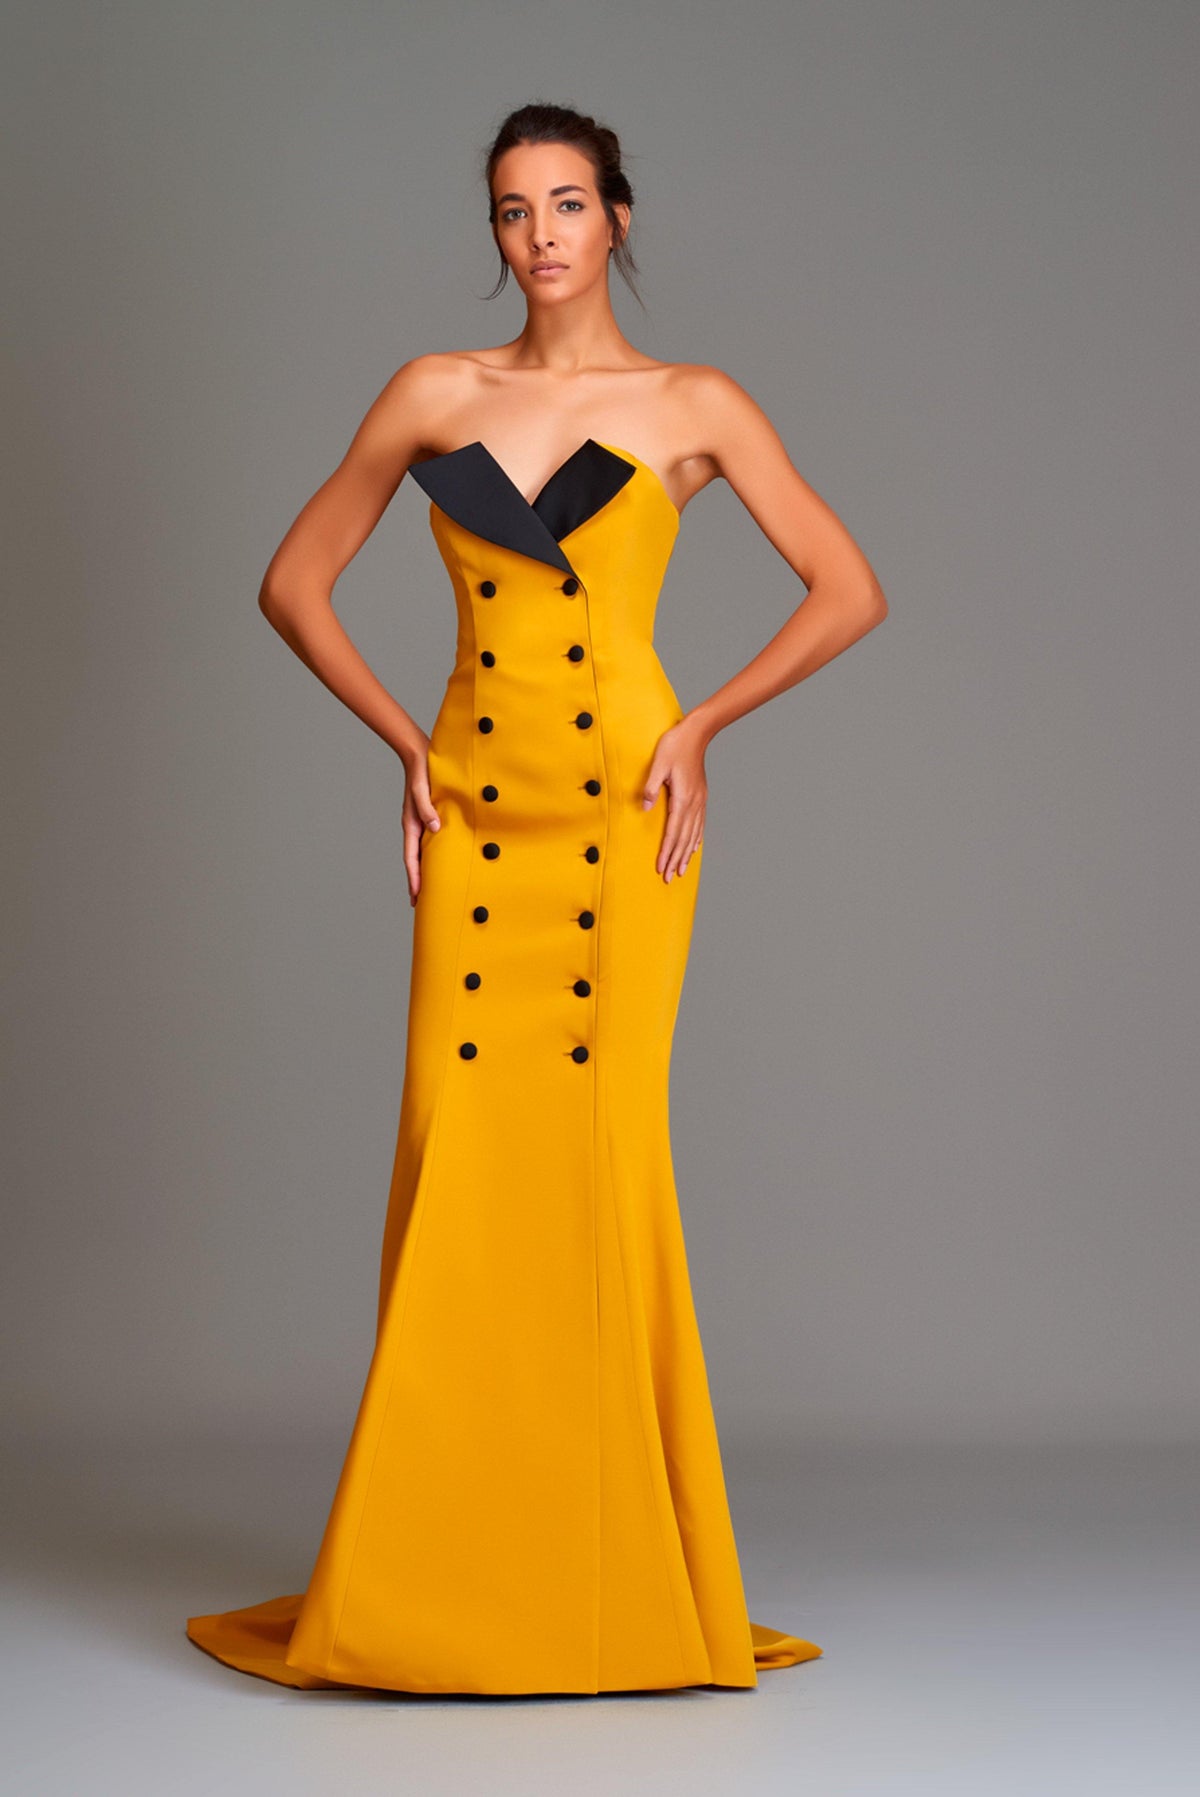 Two-toned, double breasted strapless gown - John Paul Ataker